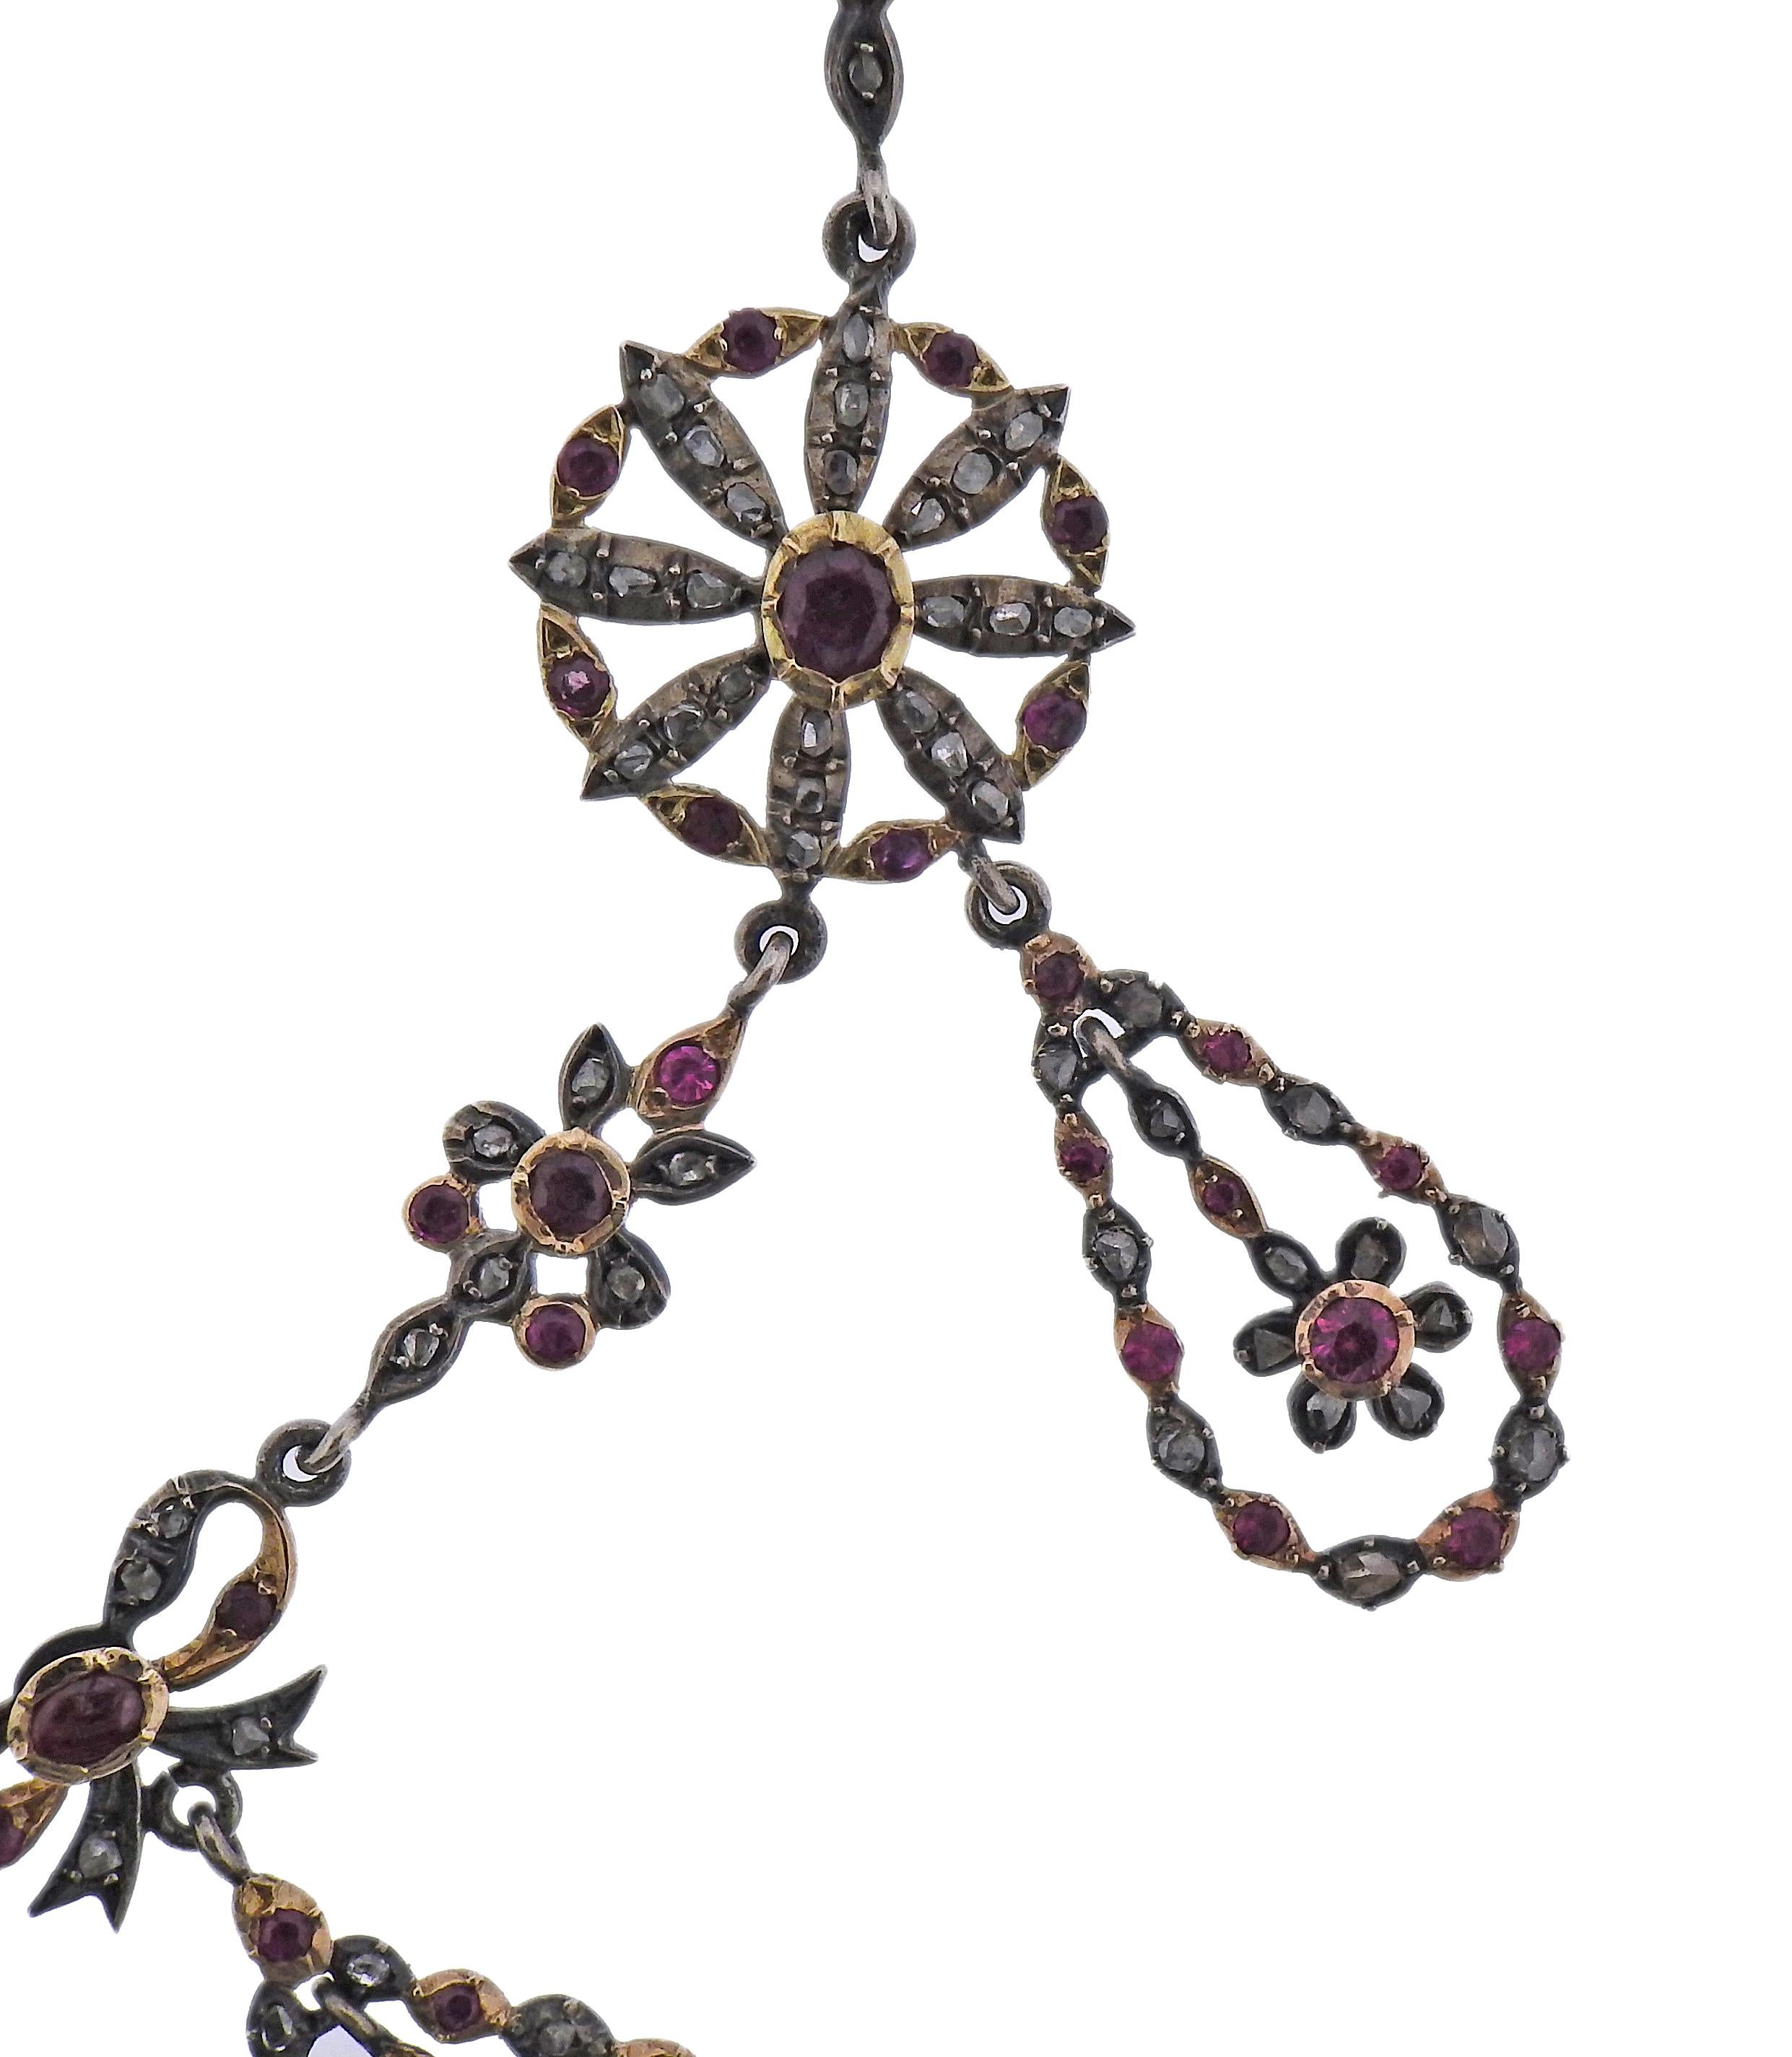 Antique Edwardian silver and 14k gold necklace, set with rubies and rose cut diamonds.  Necklace comes in box. Measures 19.5